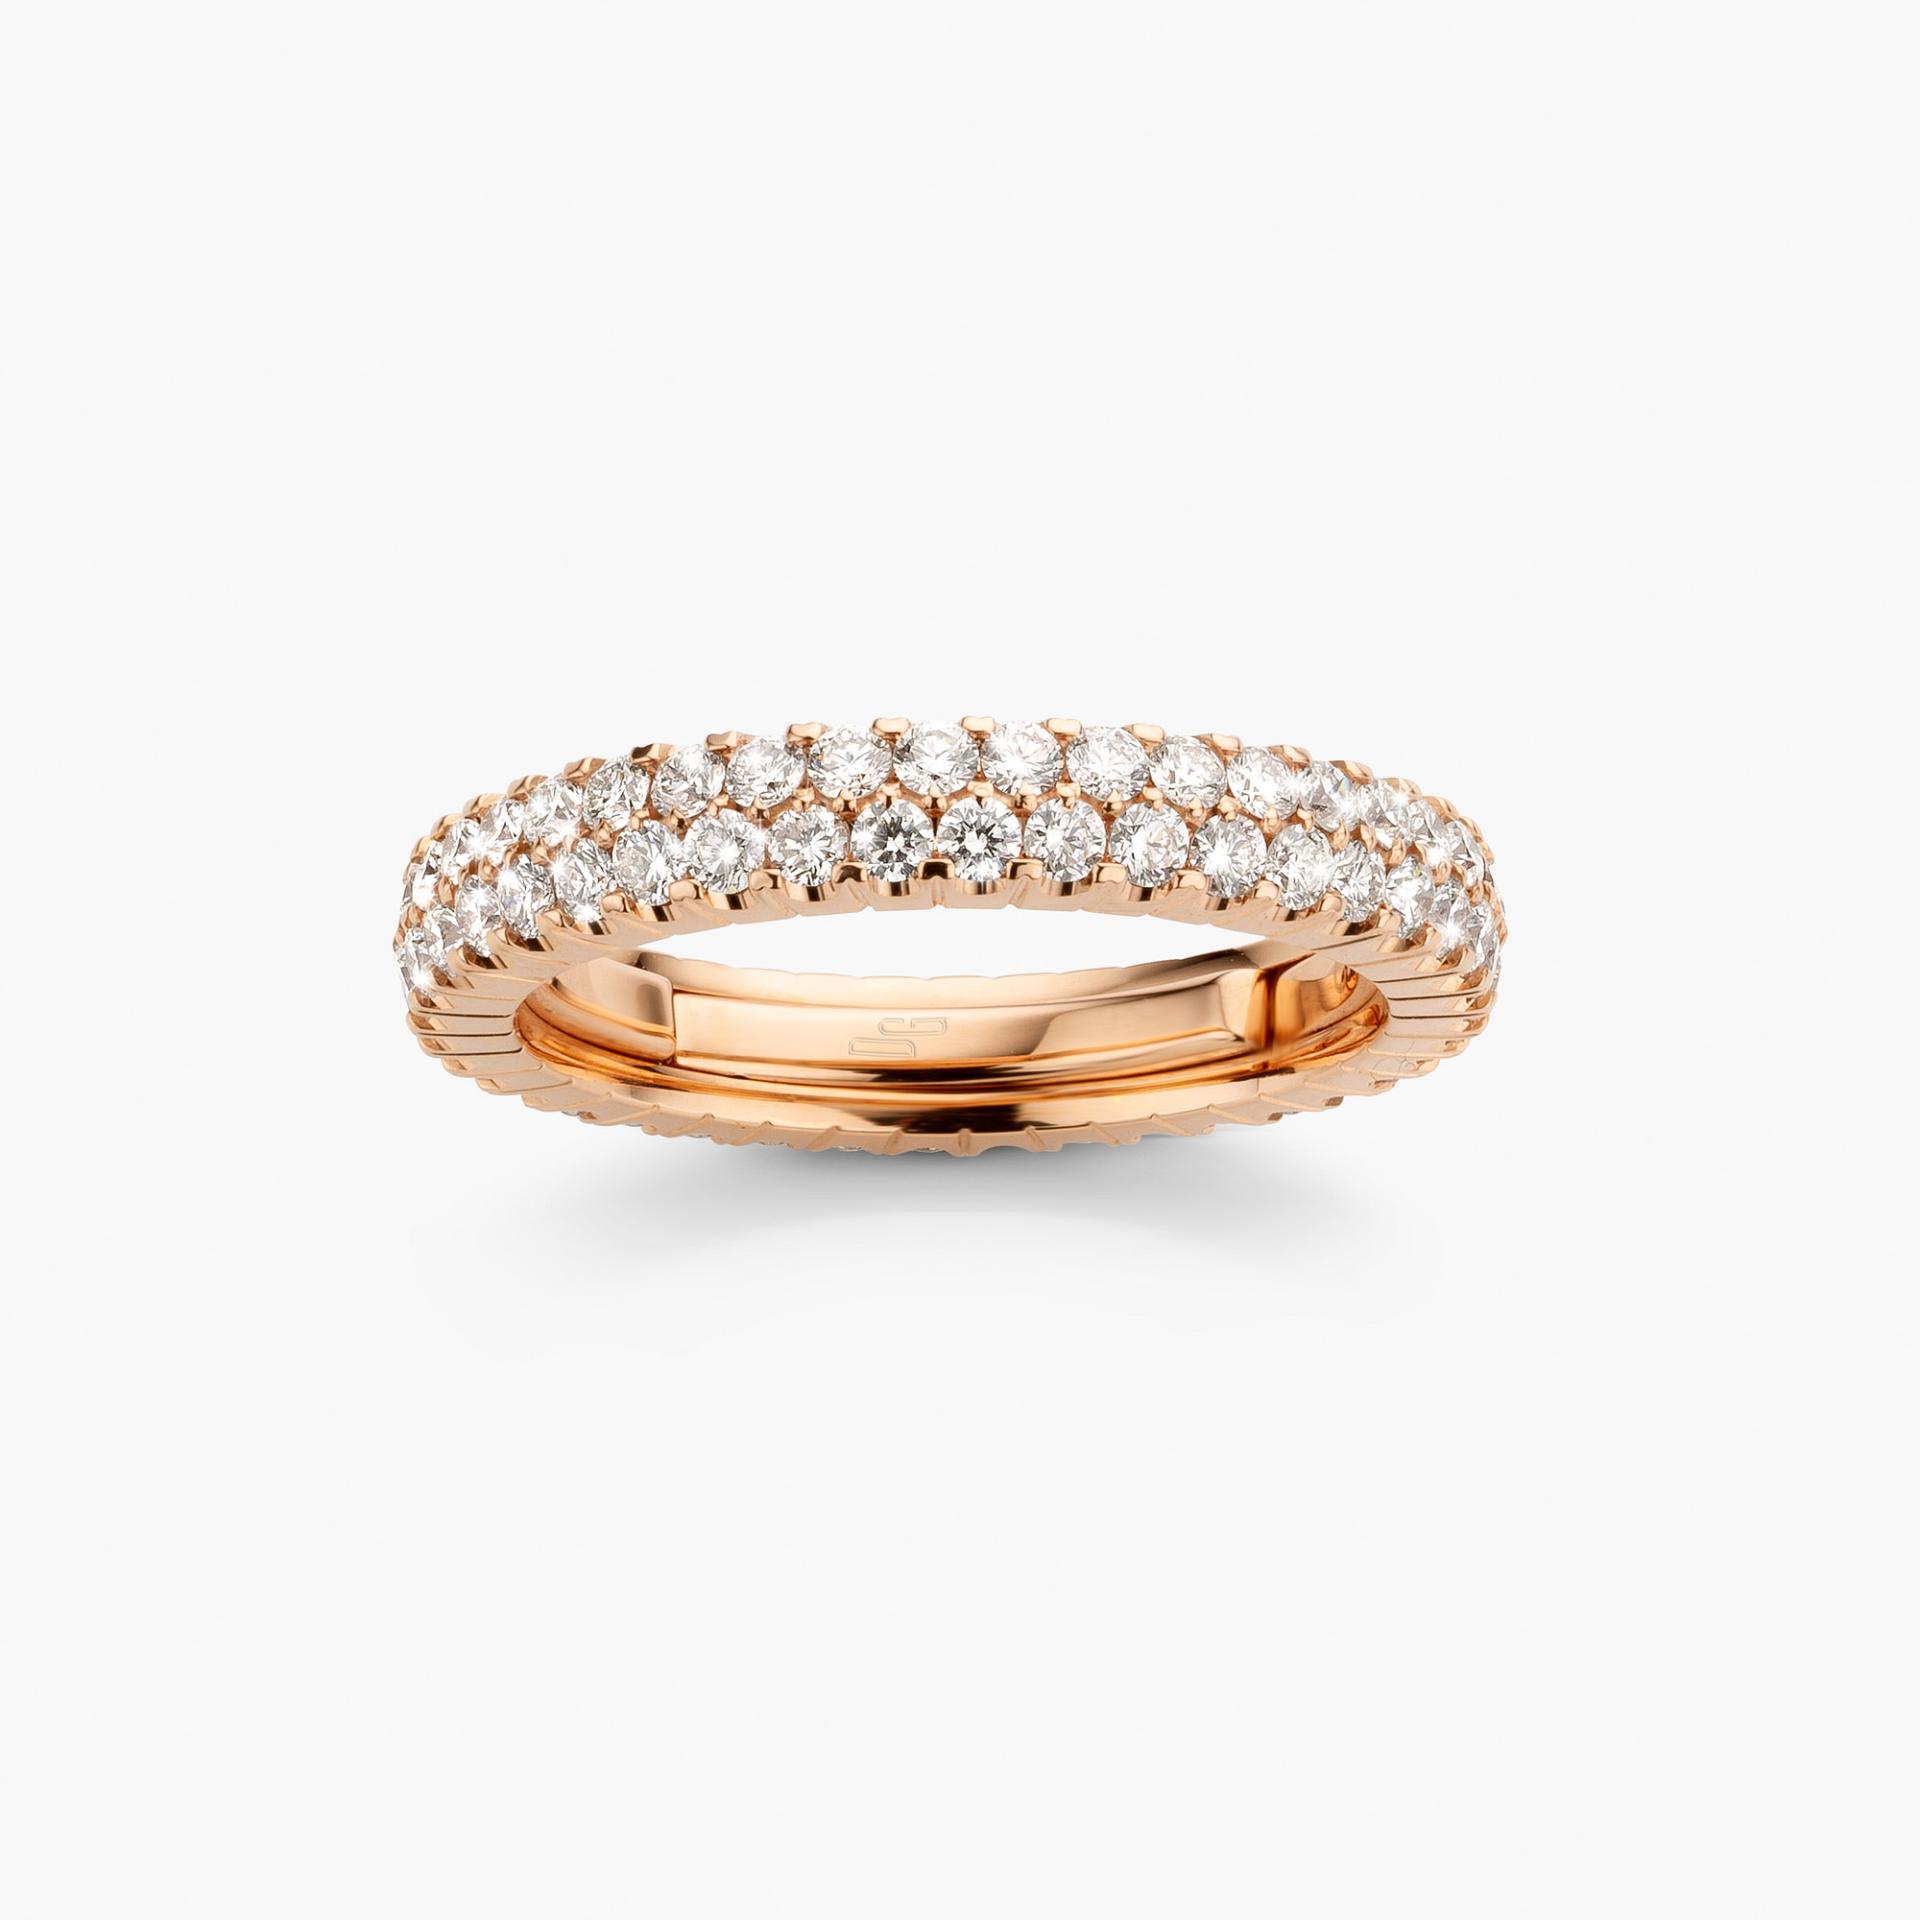 Rose gold ring Extensible set with diamonds made by Demeglio